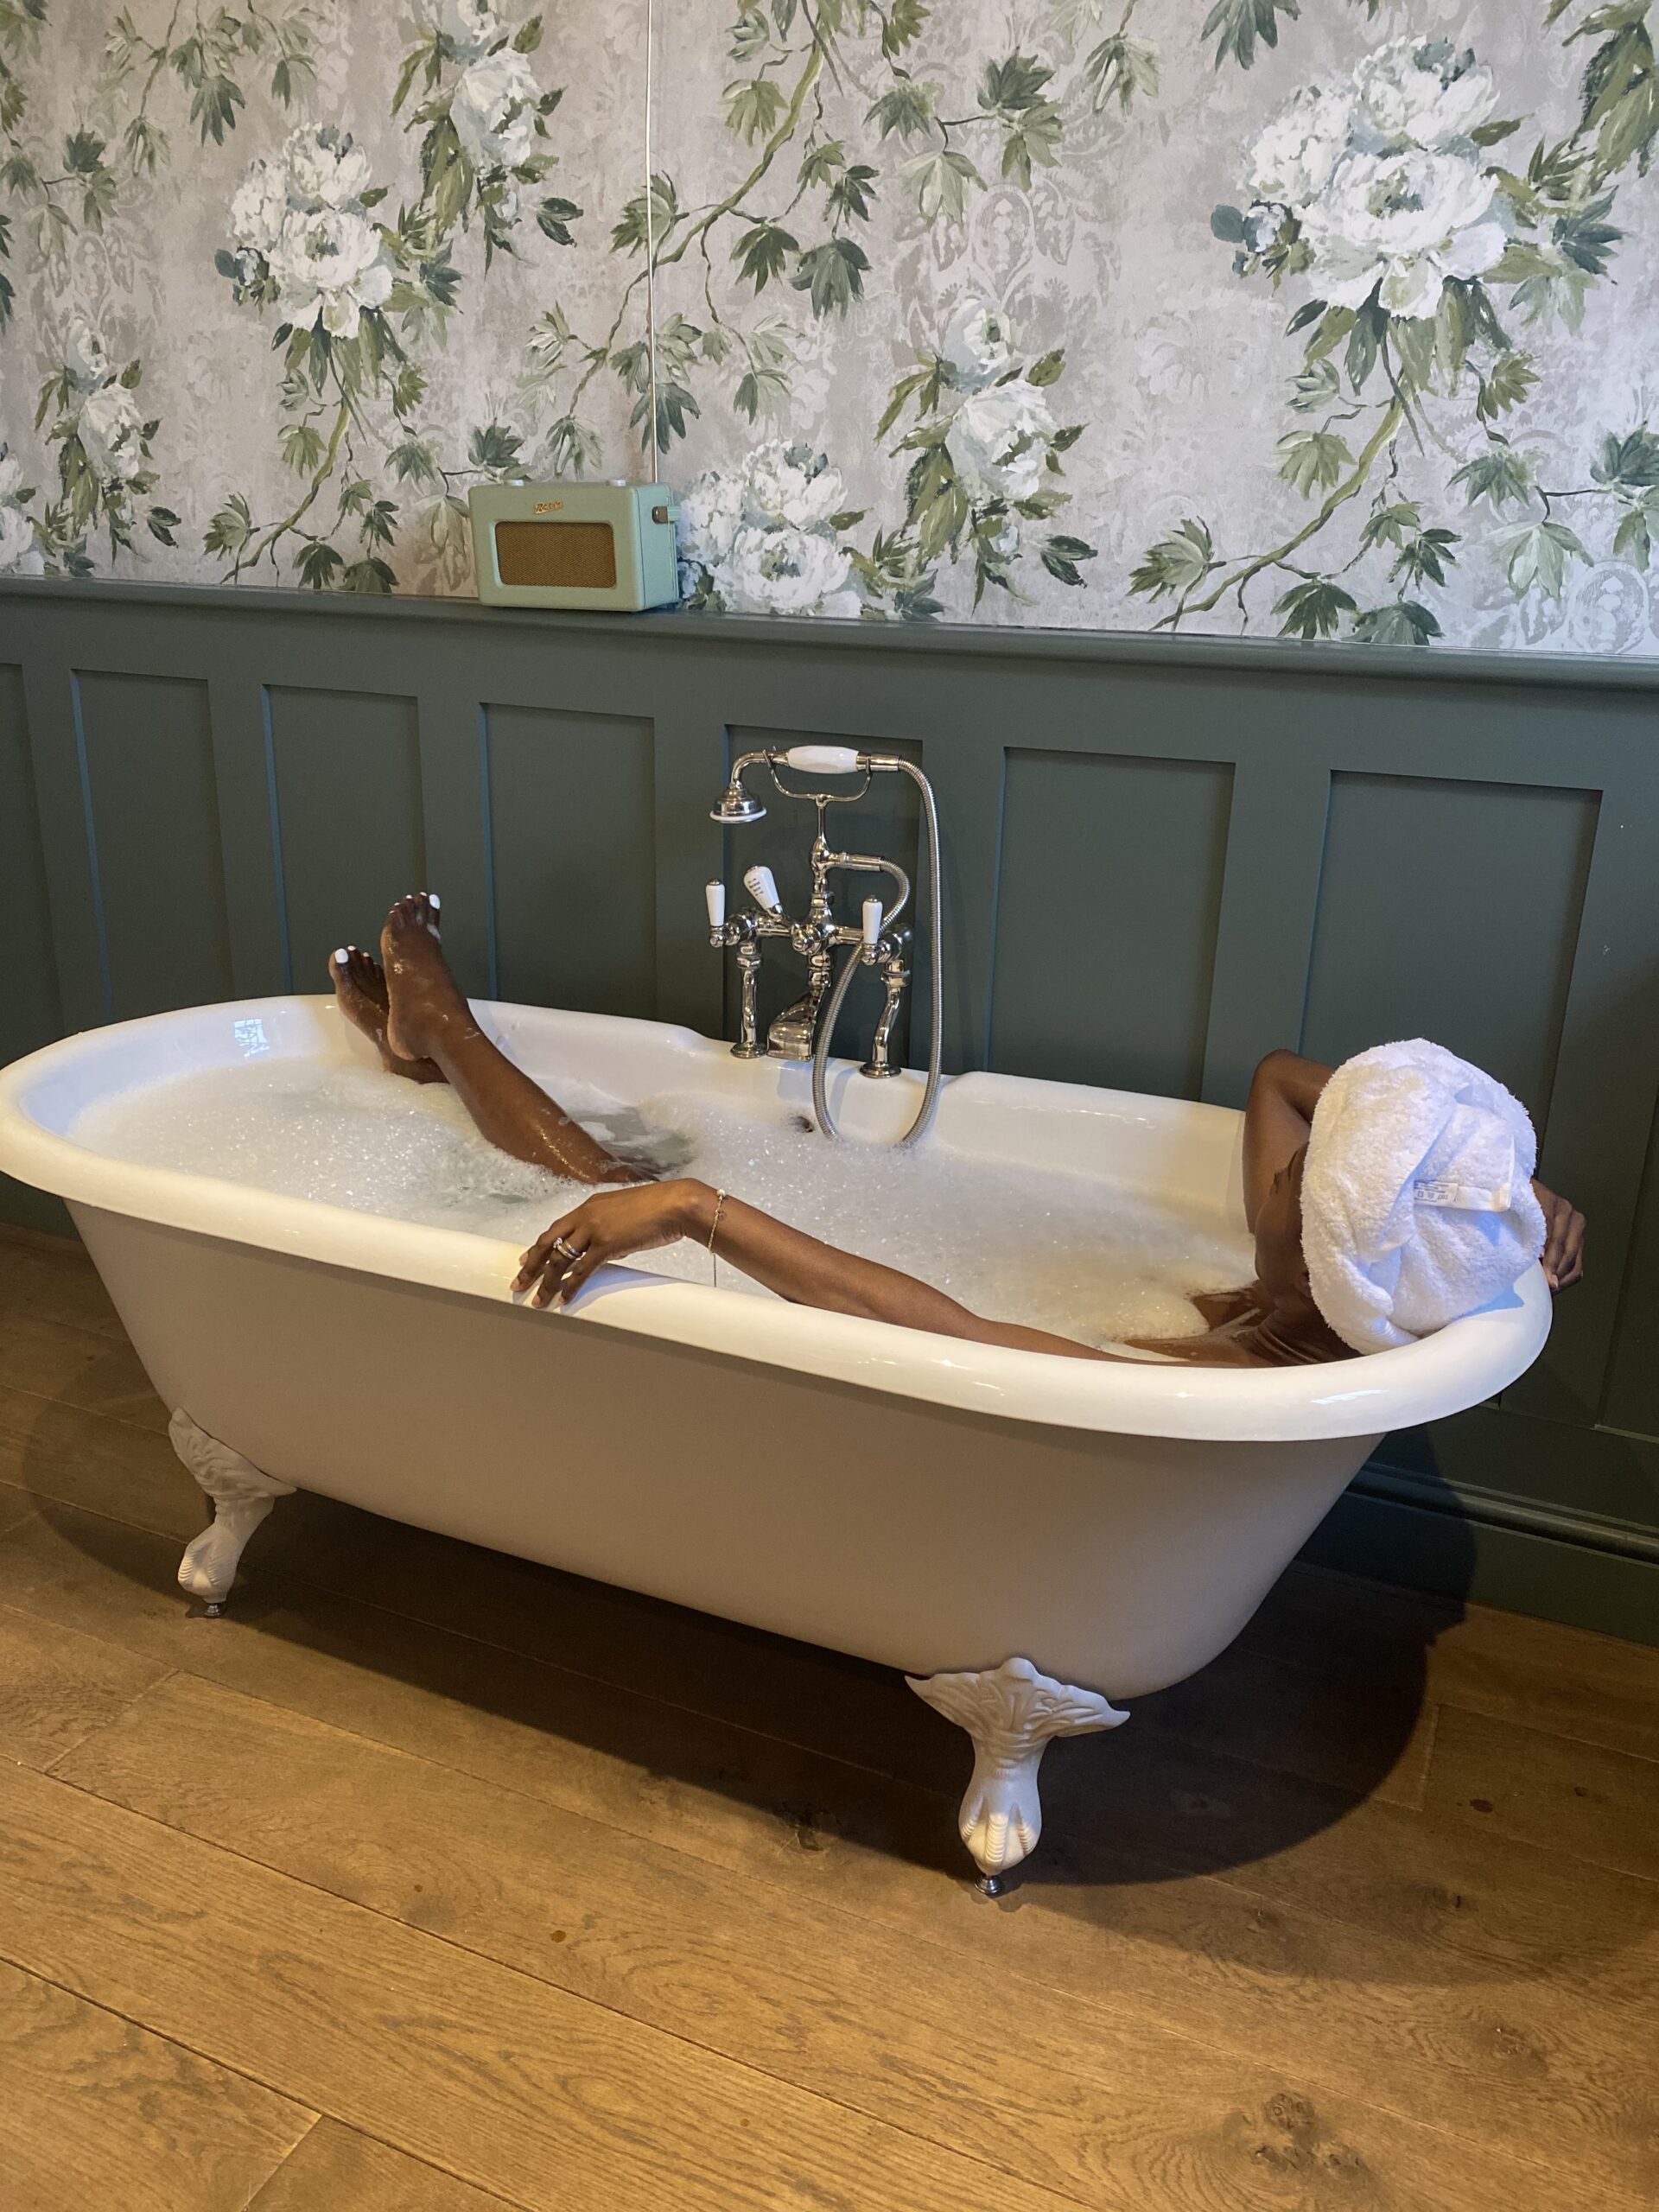 "Biggest Room" roll up bath tub at The Rectory Hotel, Cotswolds - lifewithbugo